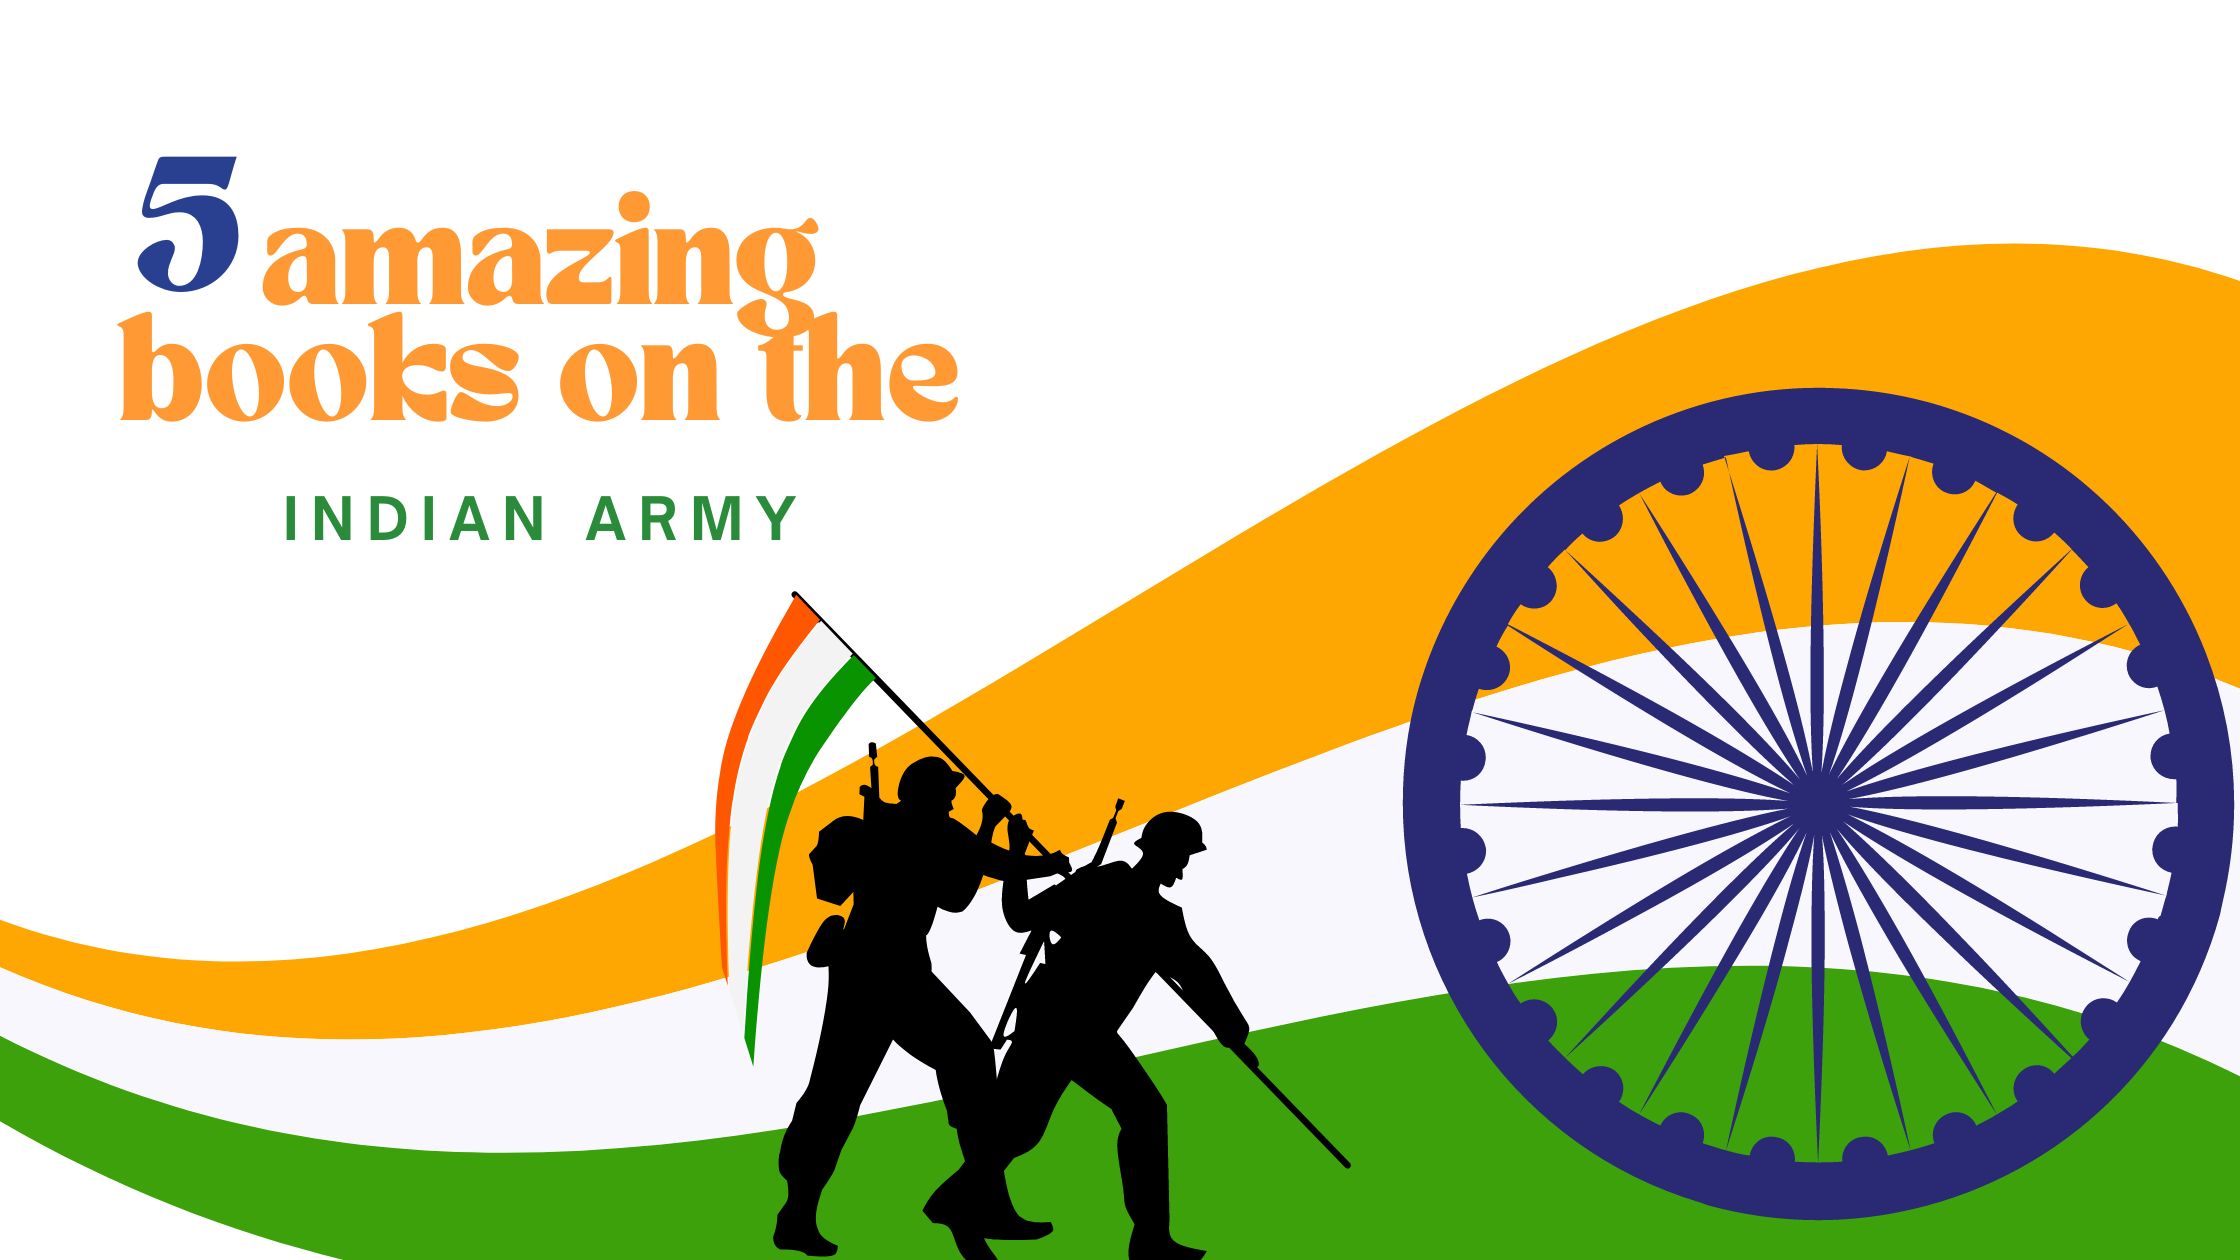 5 amazing books on the Indian Army